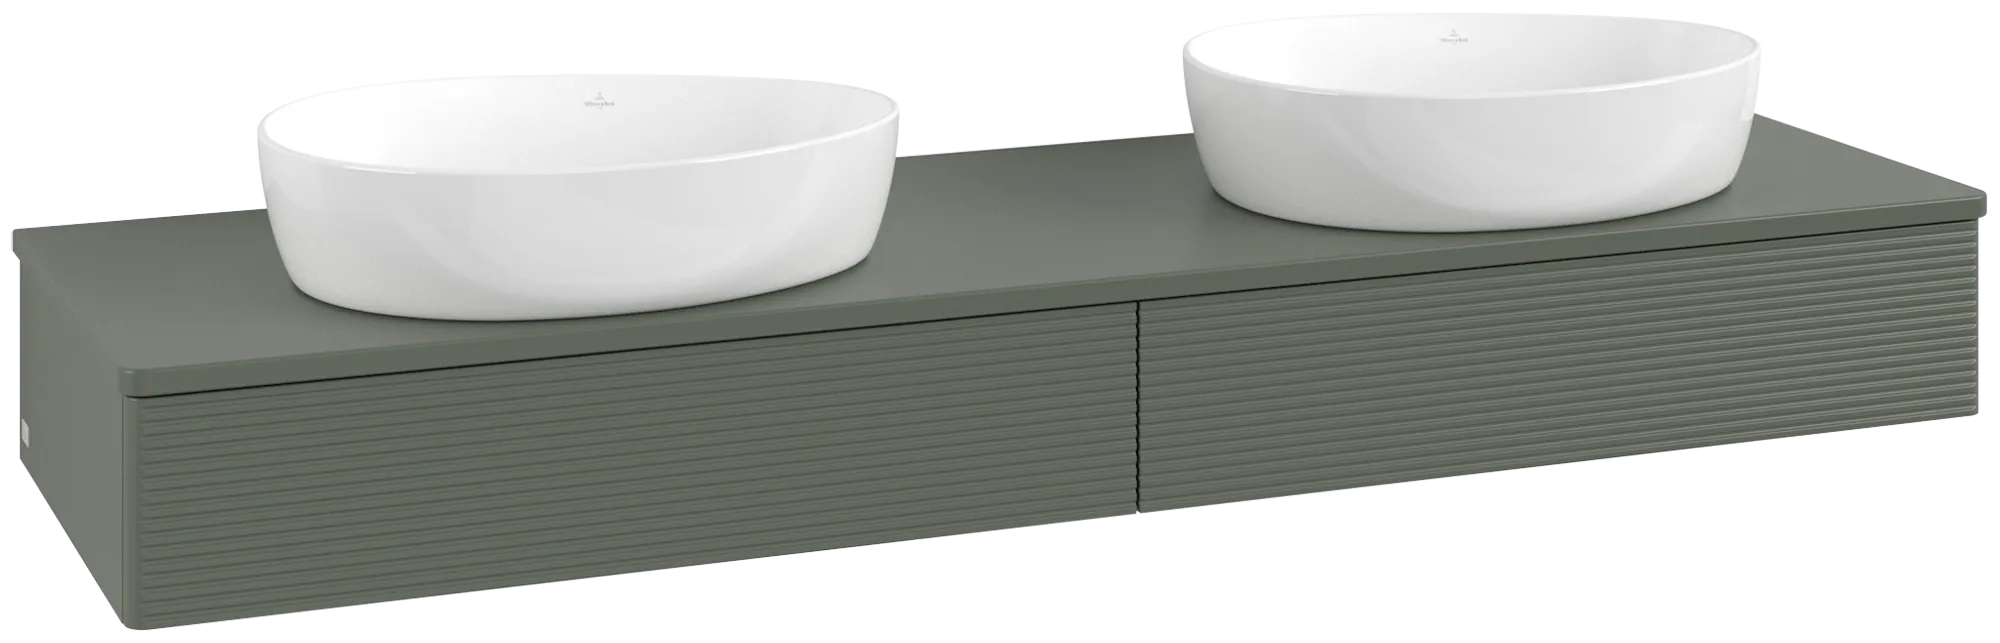 VILLEROY BOCH Antao Vanity unit, 2 pull-out compartments, 1600 x 190 x 500 mm, Front with grain texture, Leaf Green Matt Lacquer / Leaf Green Matt Lacquer #K17150HL resmi